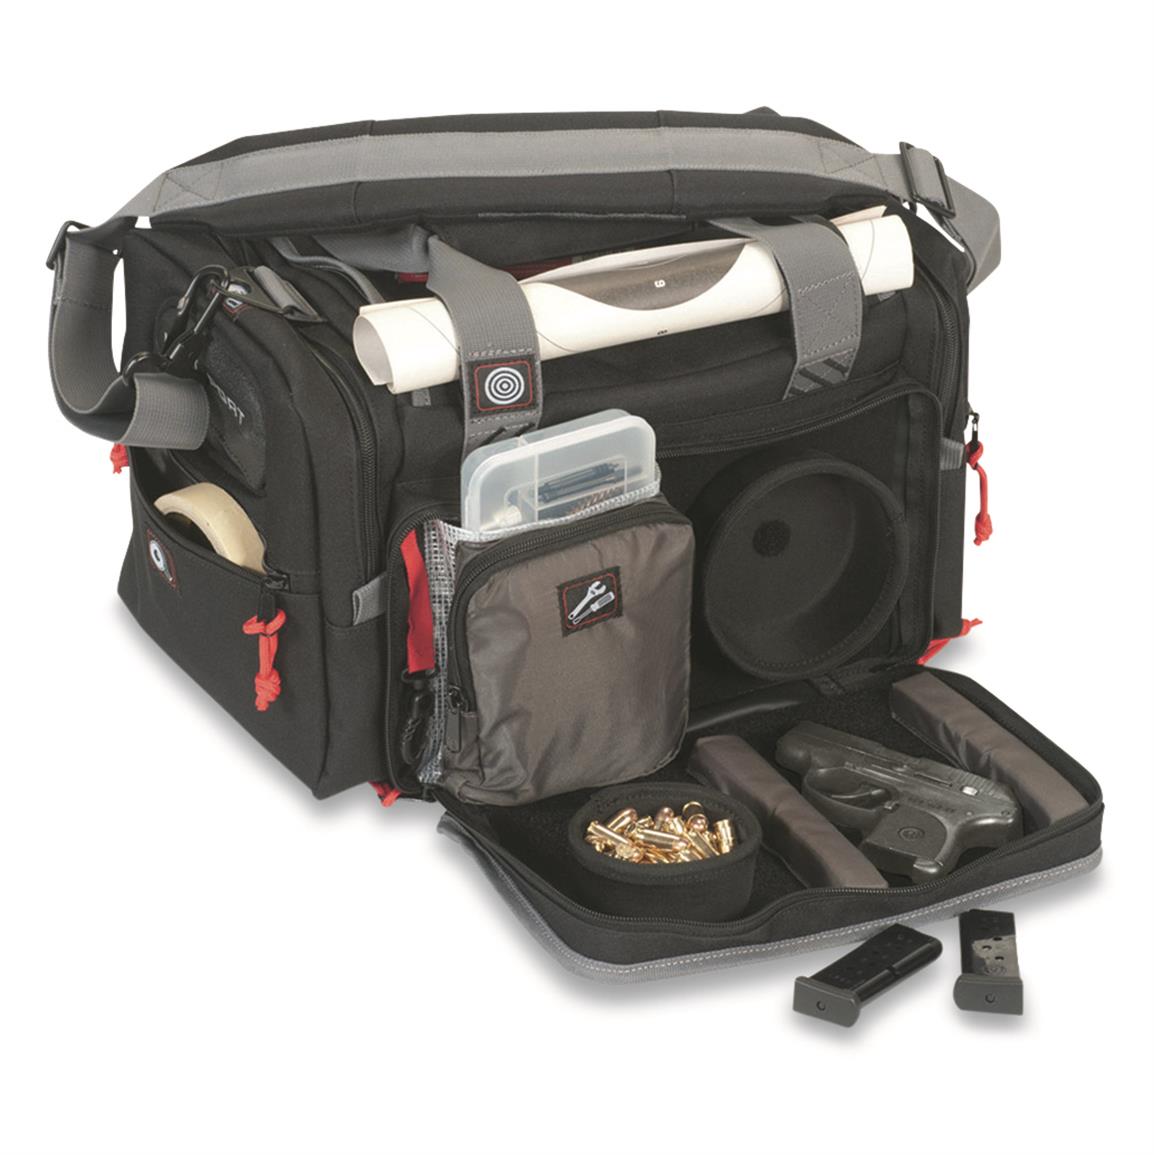 G-Outdoors Medium Range Bag with Lift Ports and Ammo Dump Cups